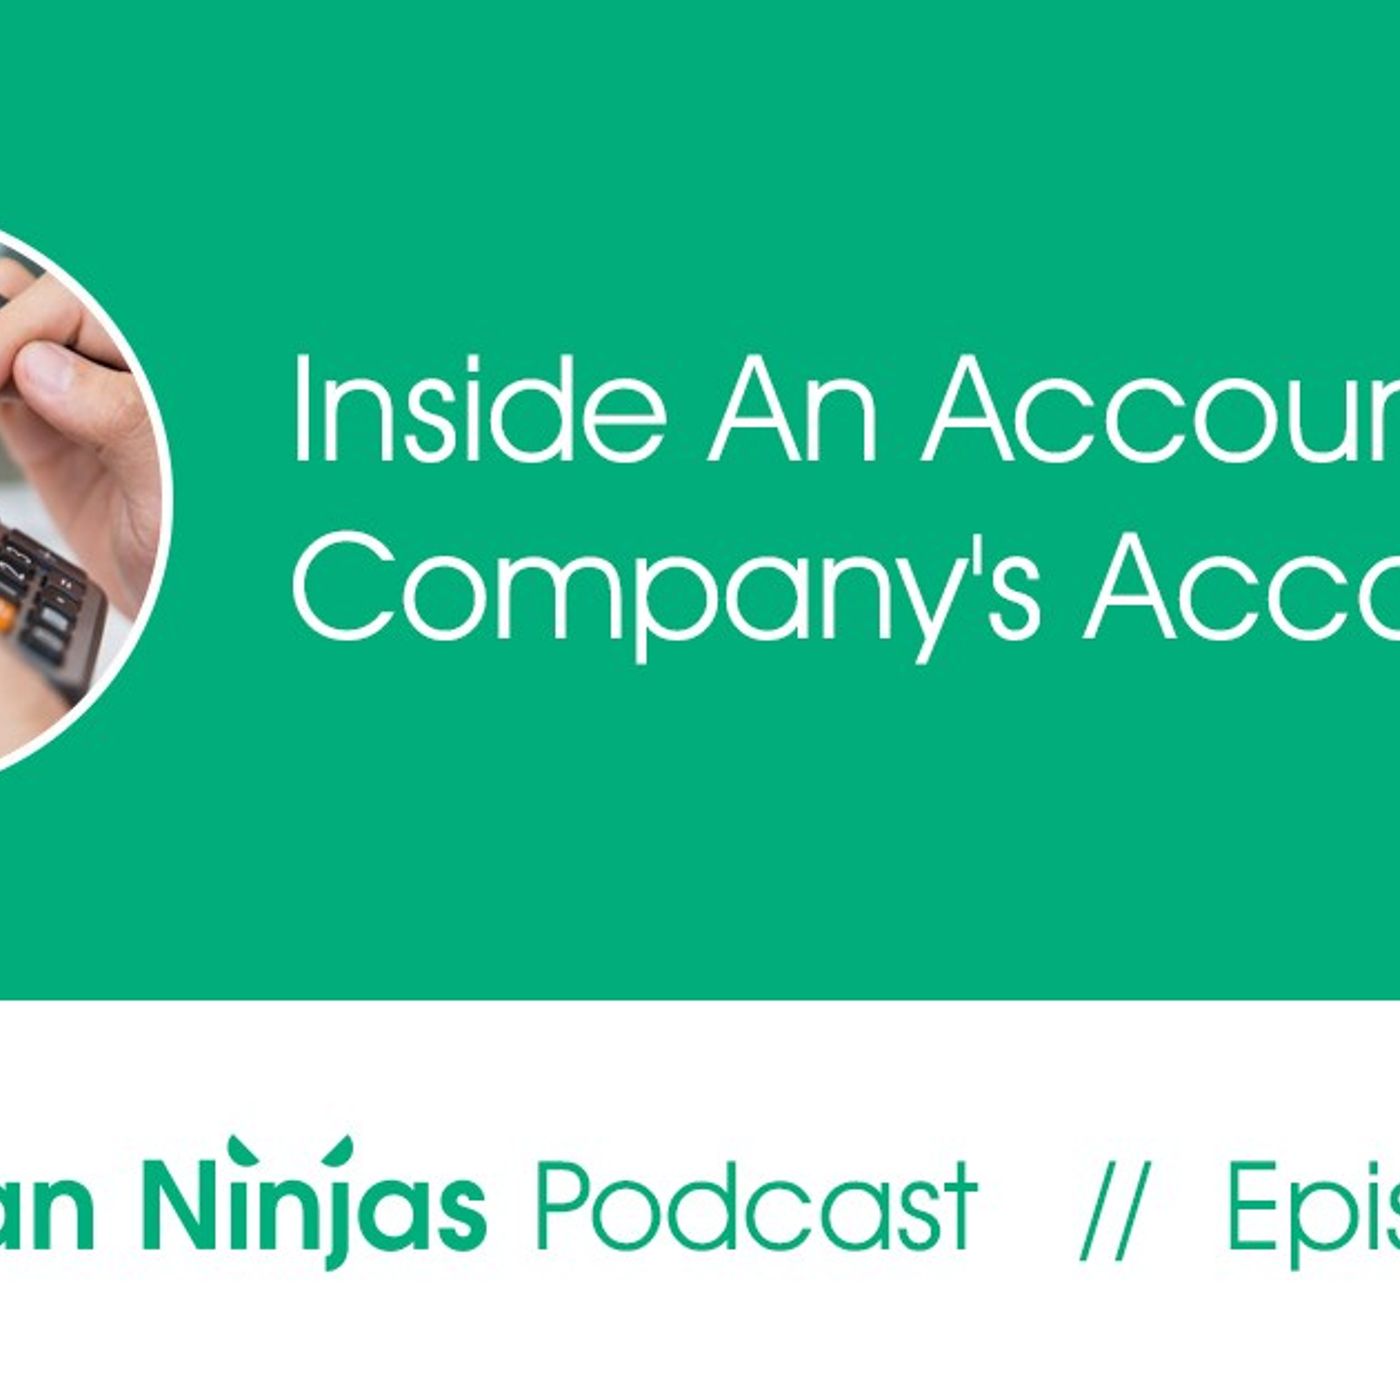 Accounting In A Bookkeeping Company - What Really Happens?